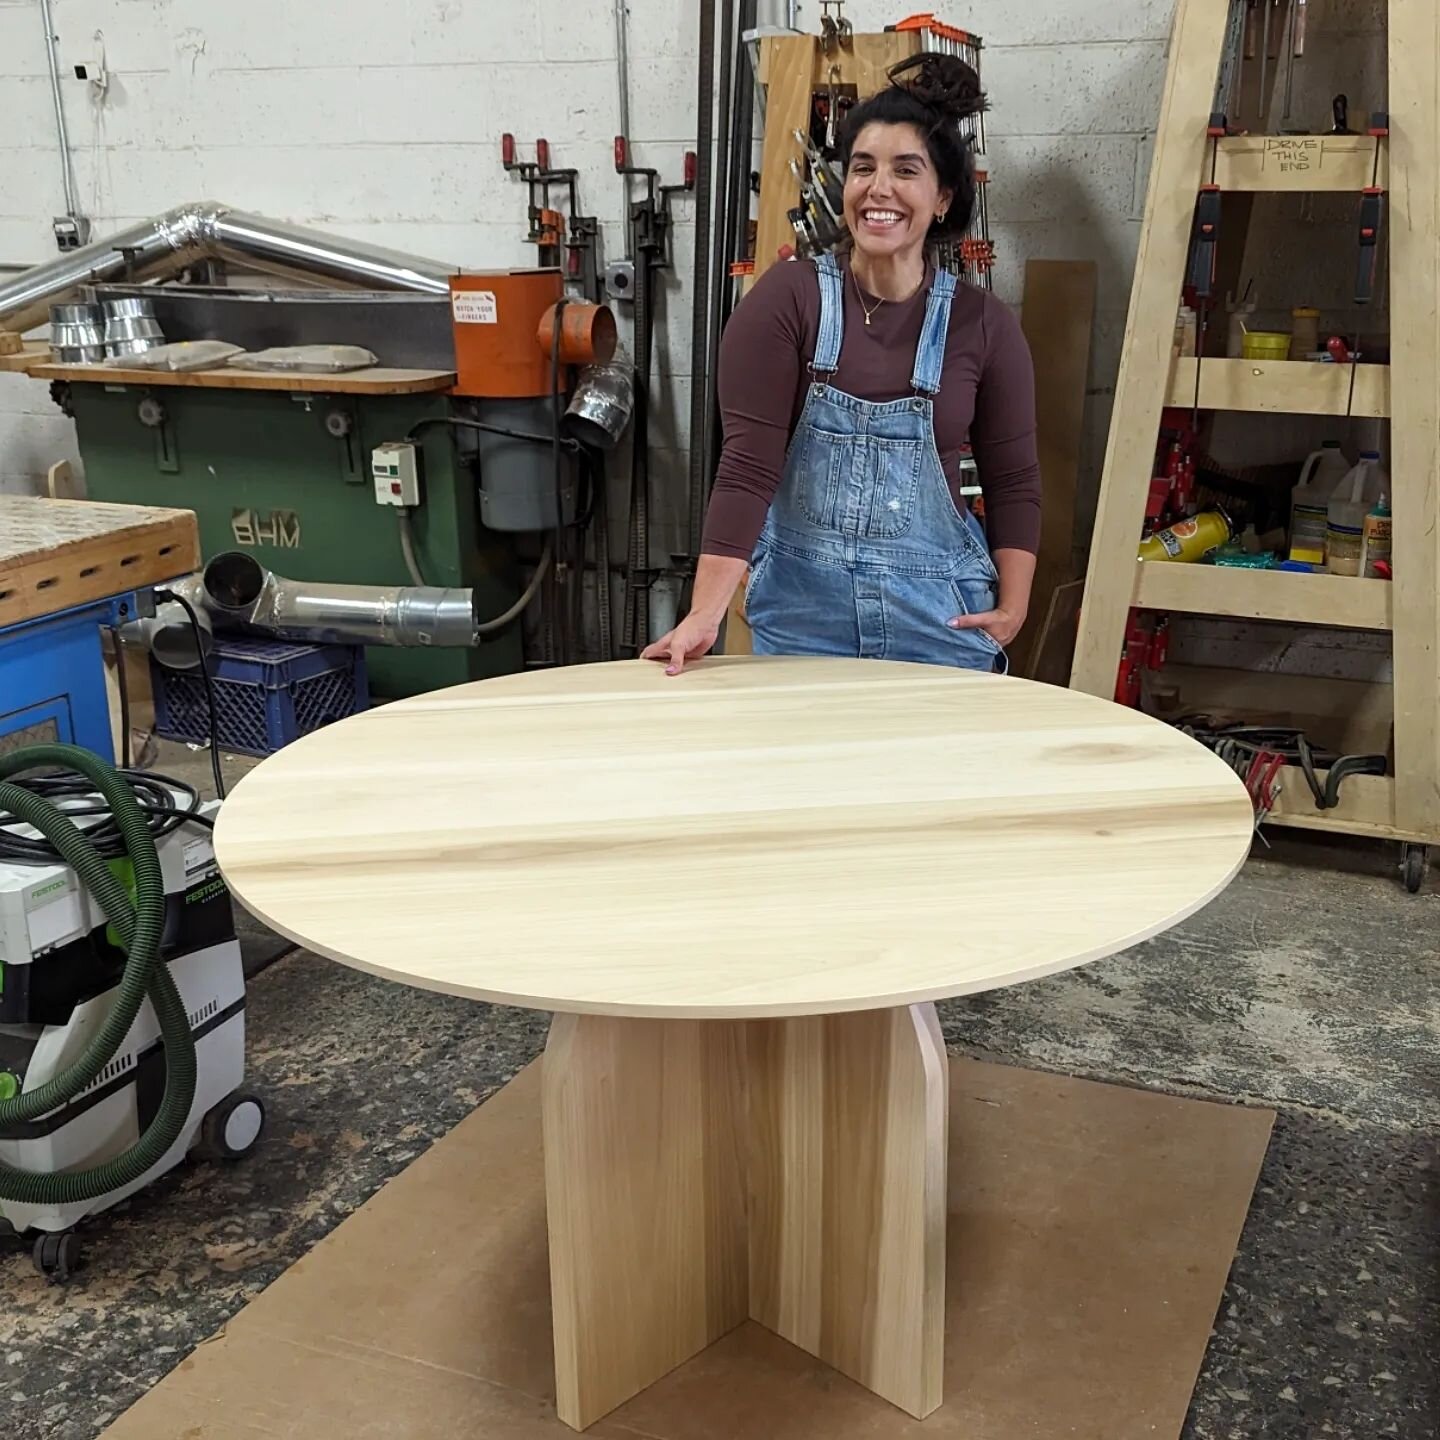 If you've been to the shop recently, you may have met Kelsey and seen the dining room table she was working on. Well, she finished it and it is now at her home keeping the family's dinner plates up off the floor. Not bad for her first project.

HCH s